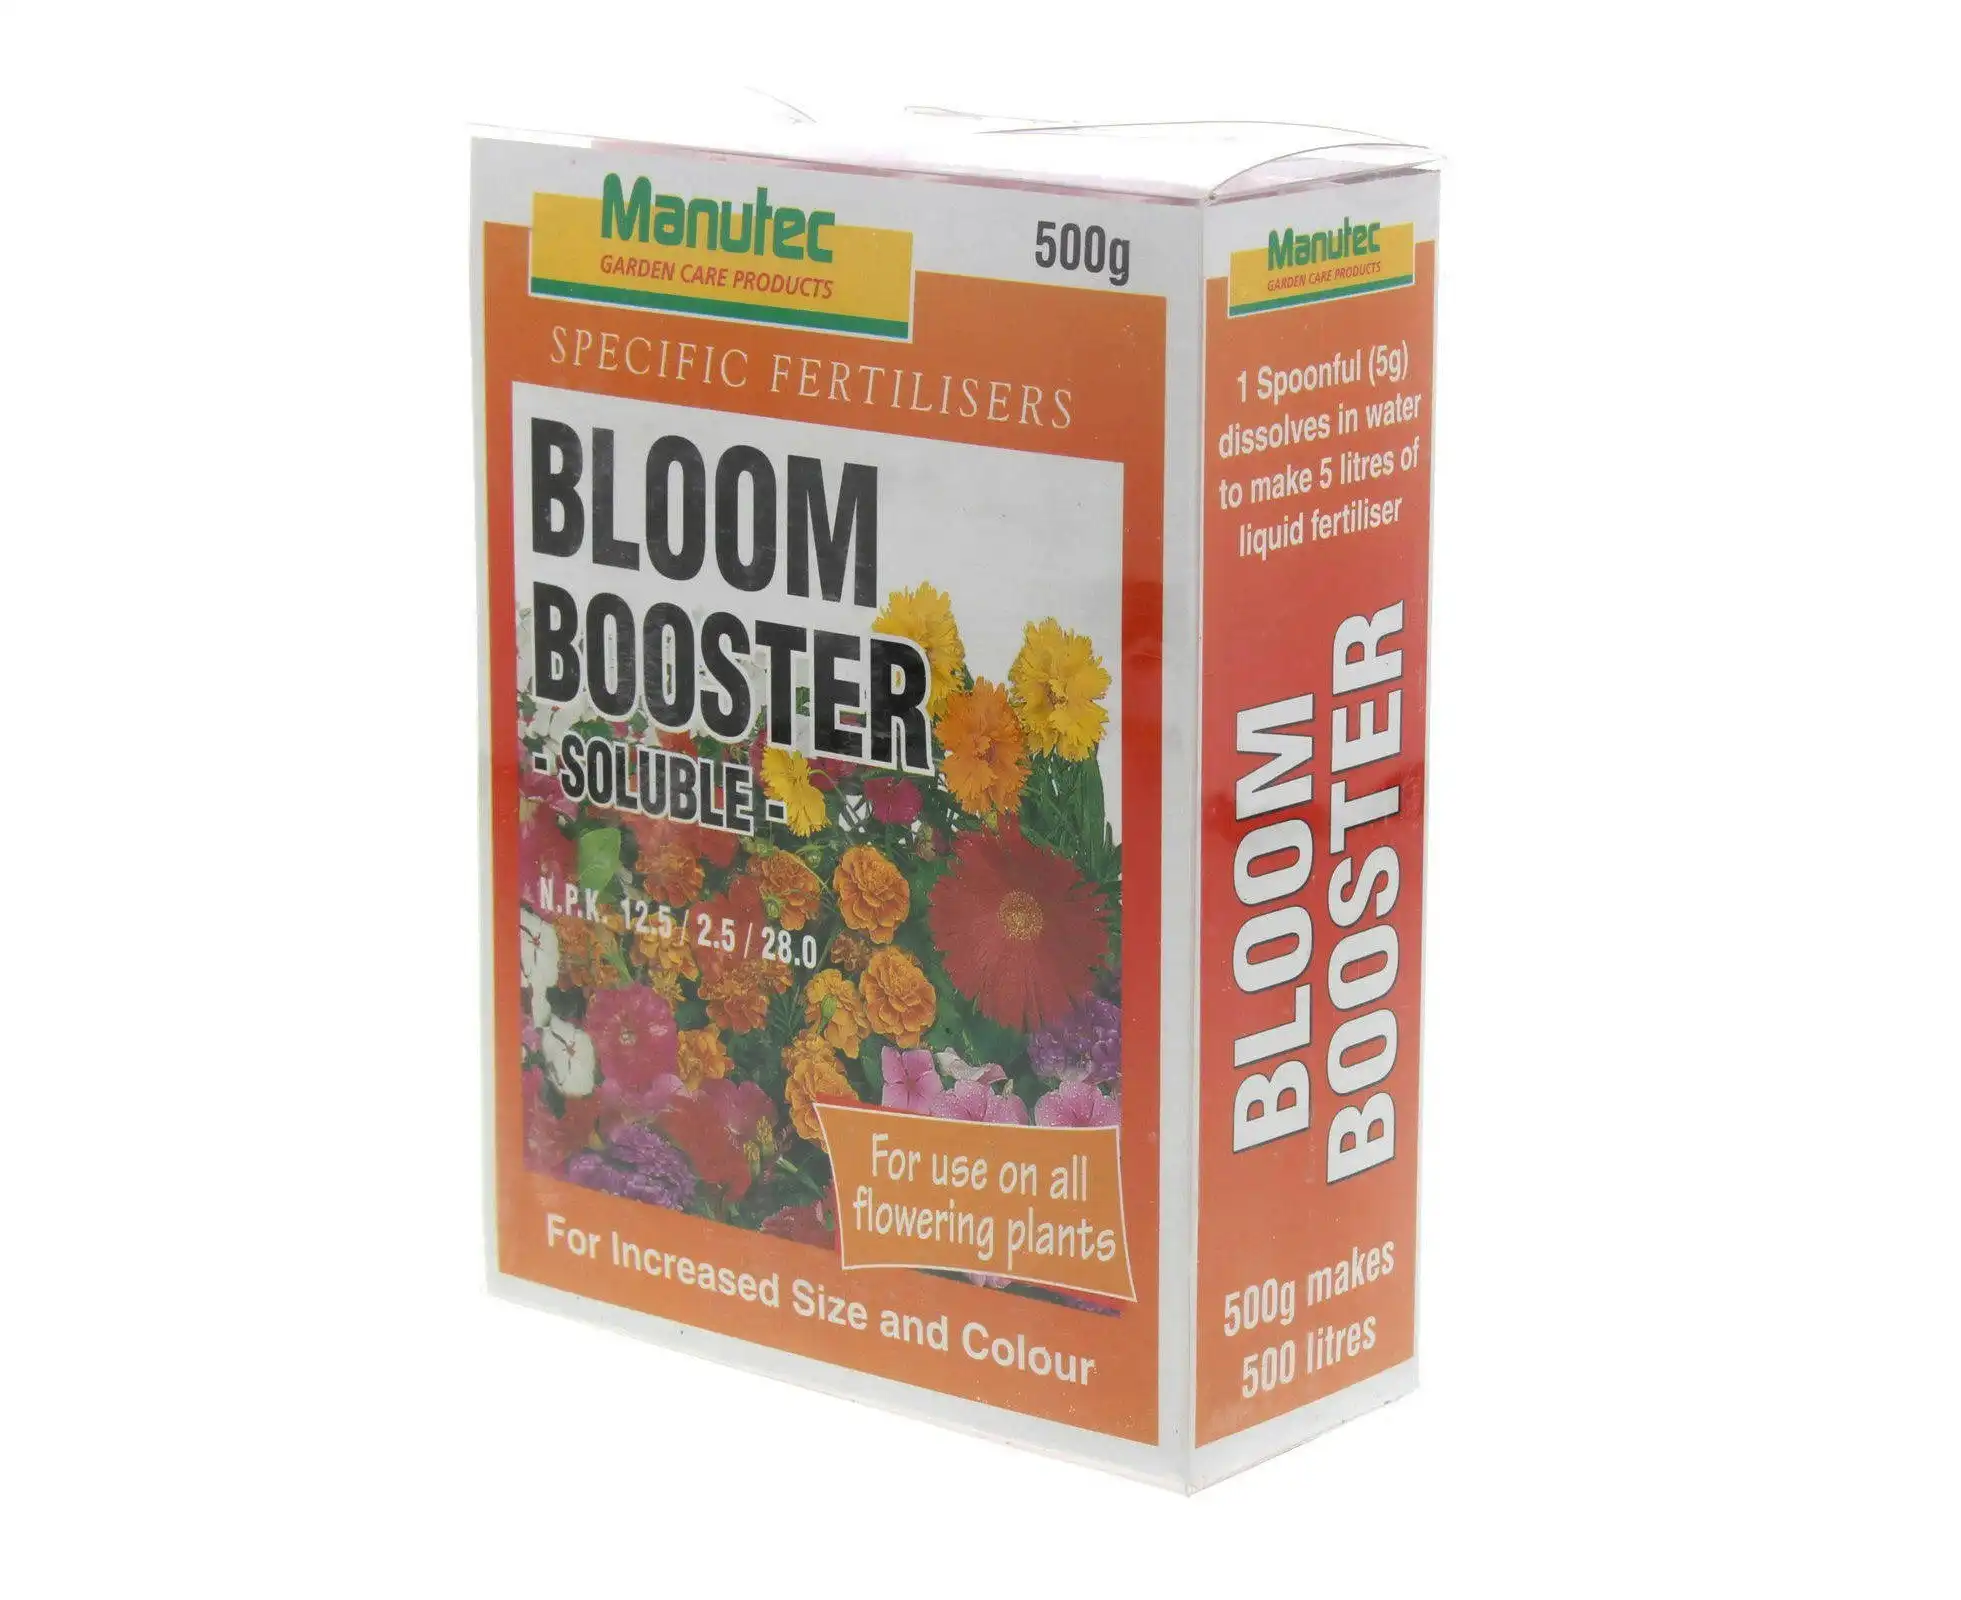 Manutec 500g Soluble Bloom Booster